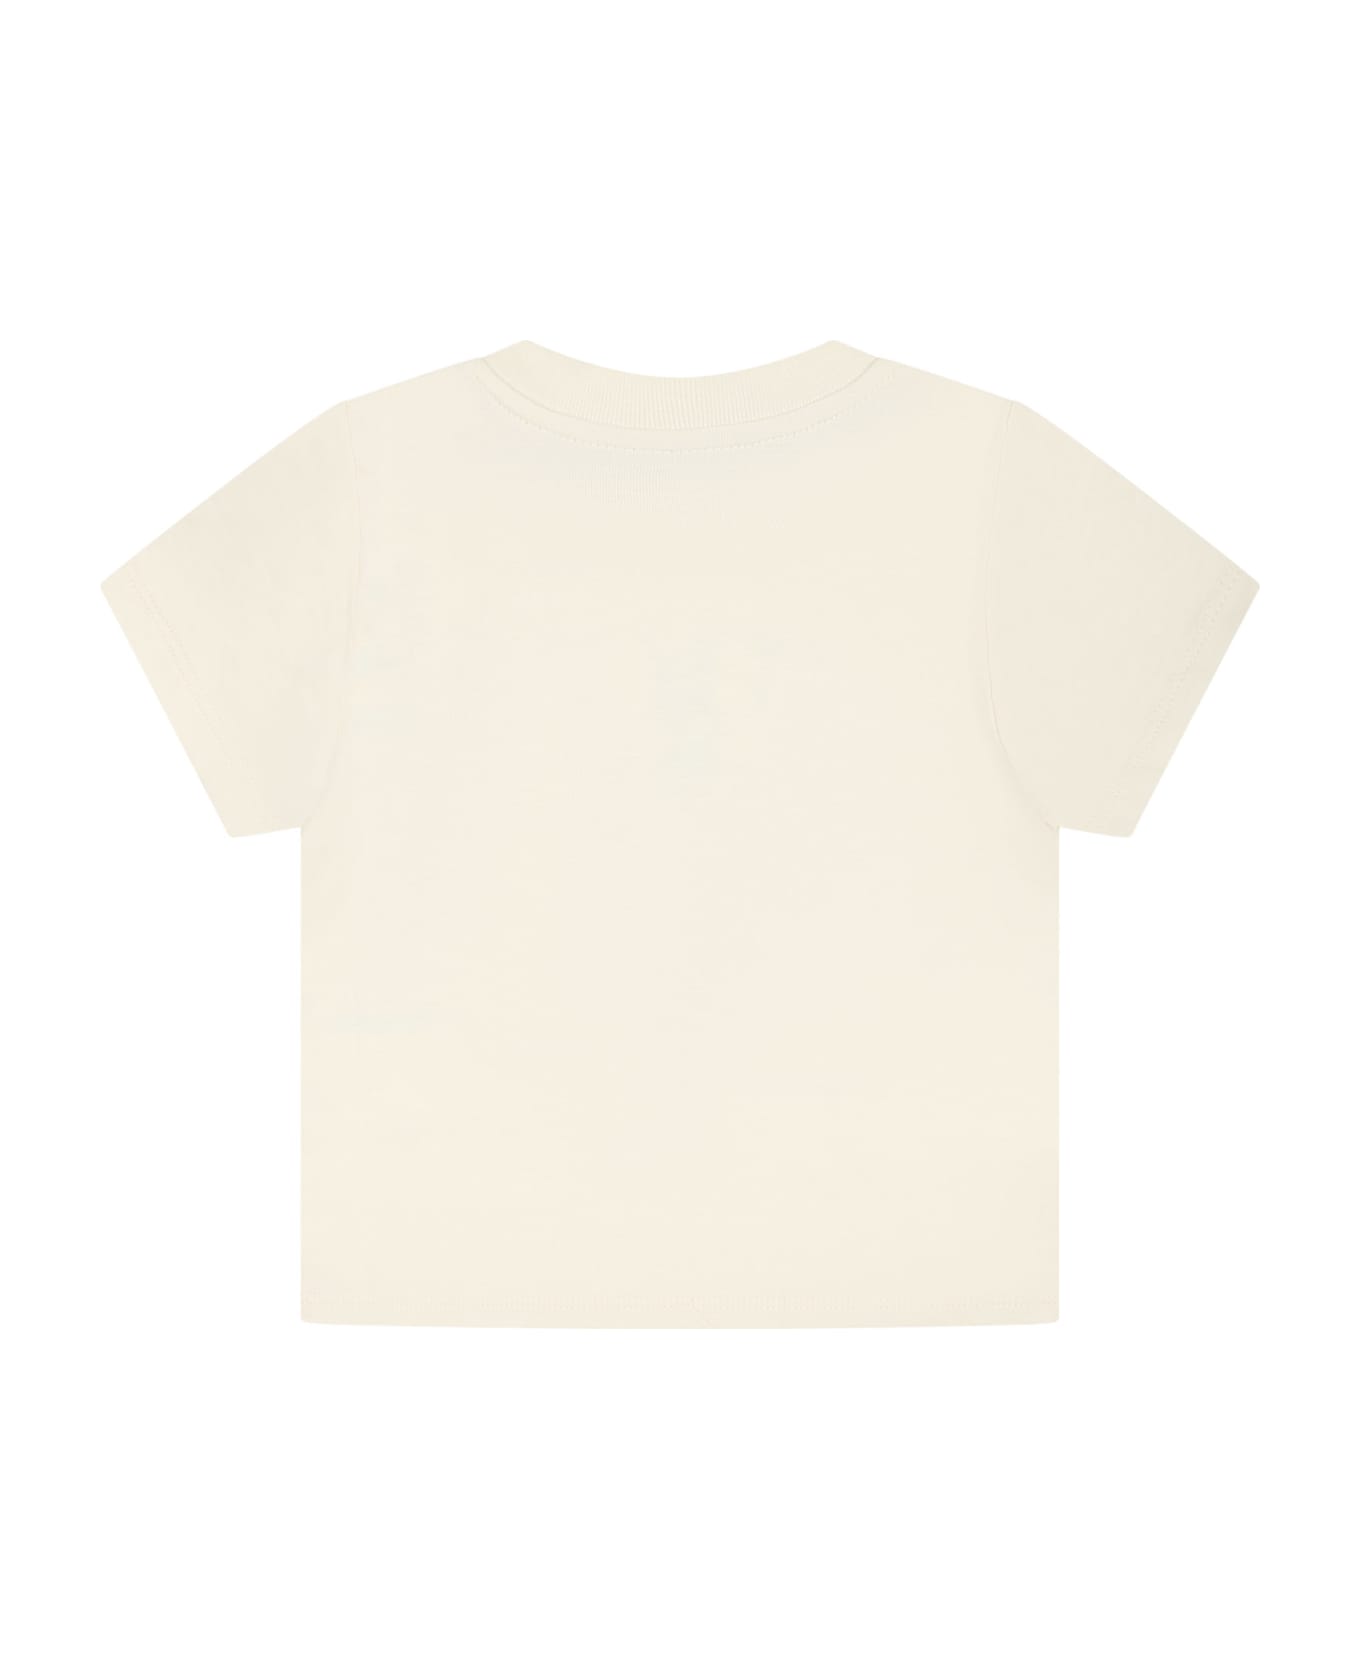 Gucci Ivory T-shirt For Baby Girl With Peter Rabbit - Yellow Tシャツ＆ポロシャツ